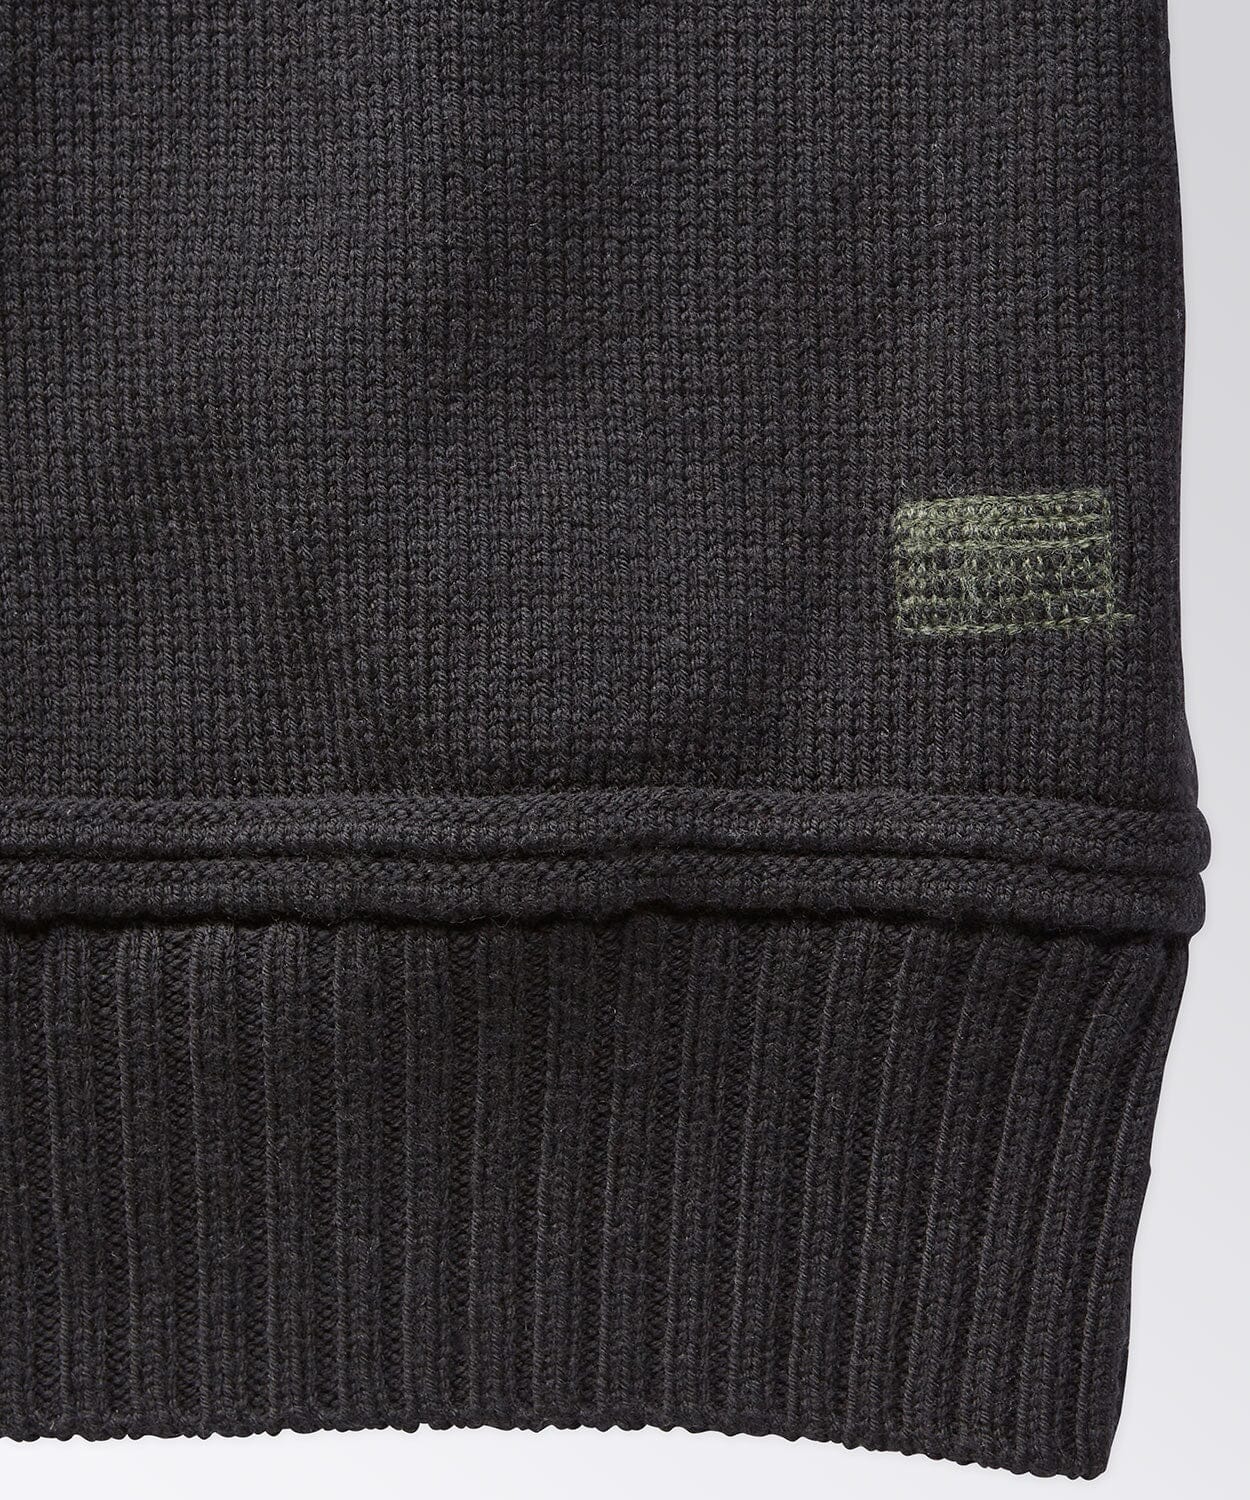 detail of a mens wool sweater